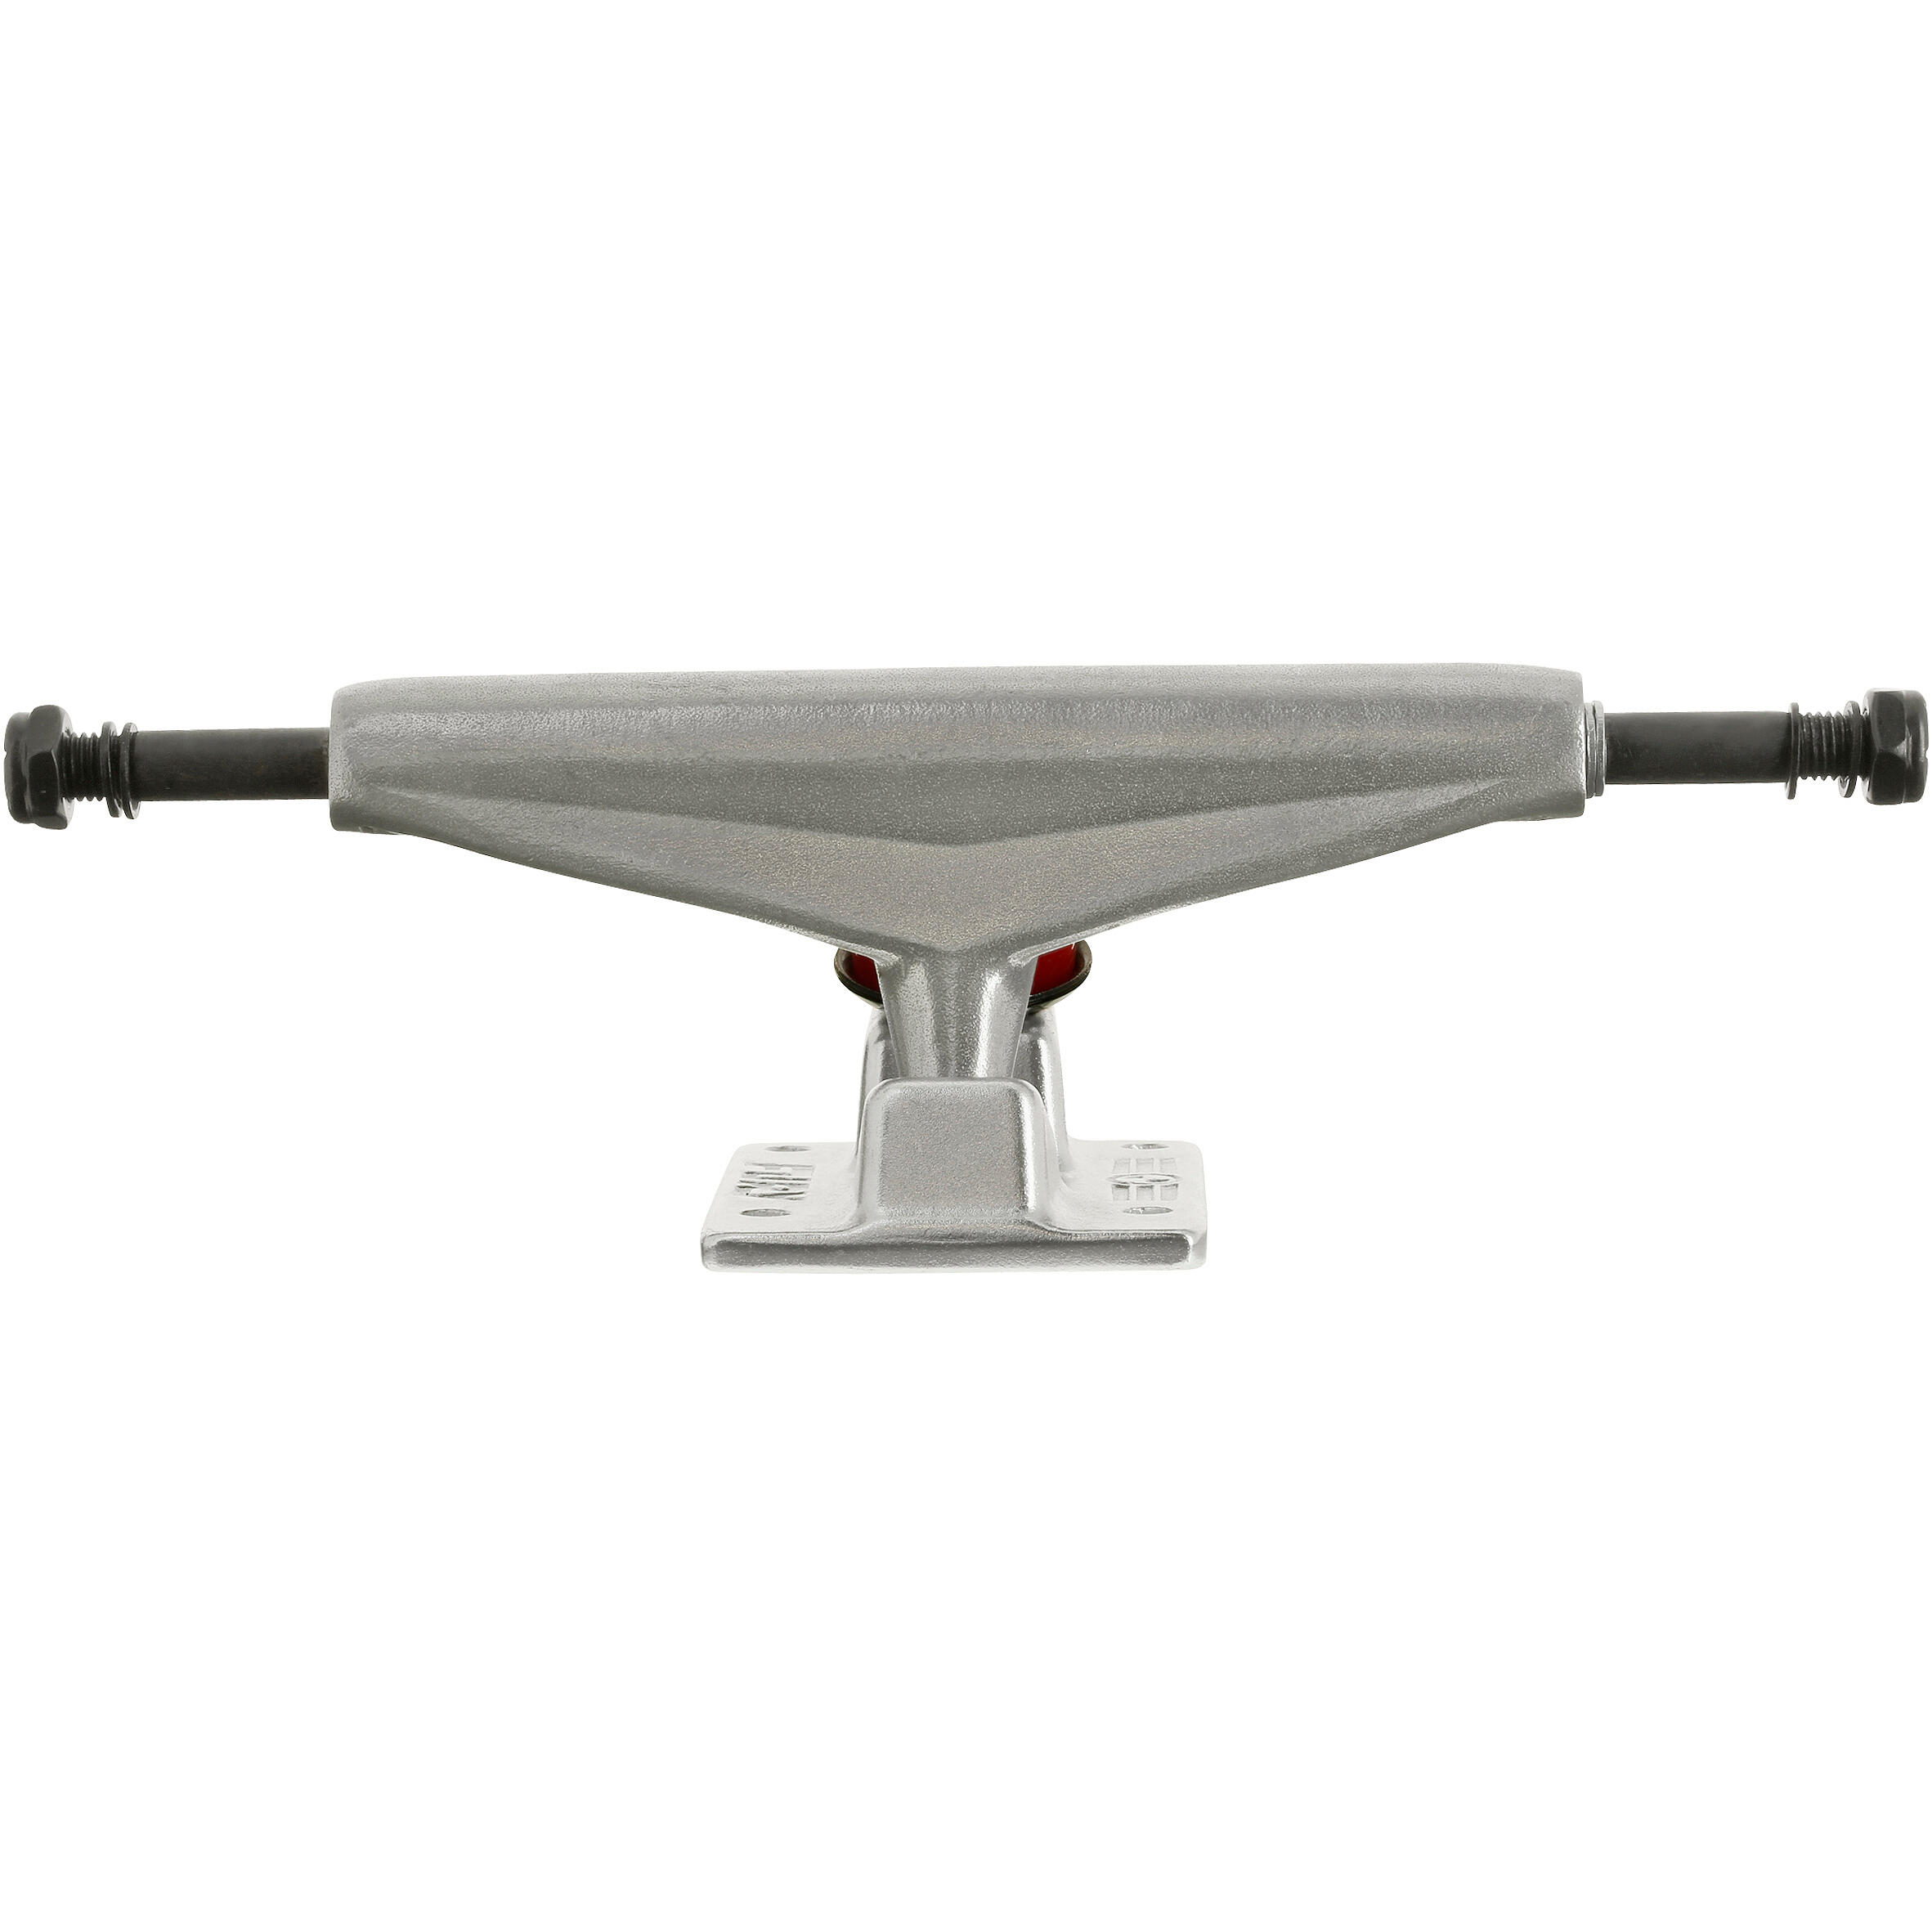 OXELO Fury Skateboard Forged Baseplate Truck Size 8.5" (21.59 mm)